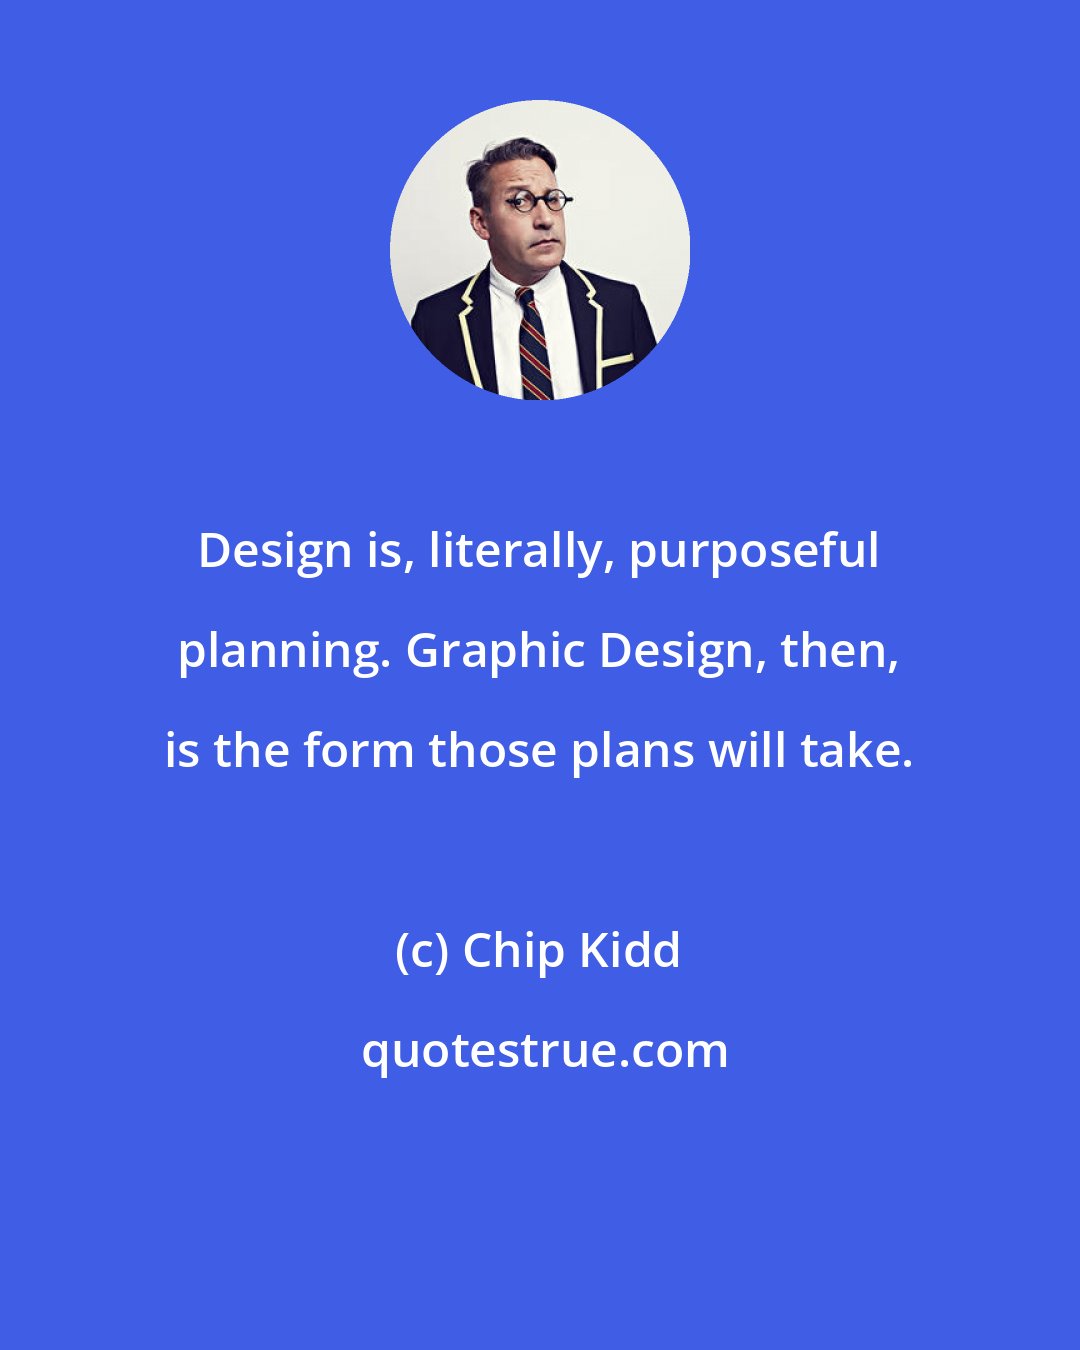 Chip Kidd: Design is, literally, purposeful planning. Graphic Design, then, is the form those plans will take.